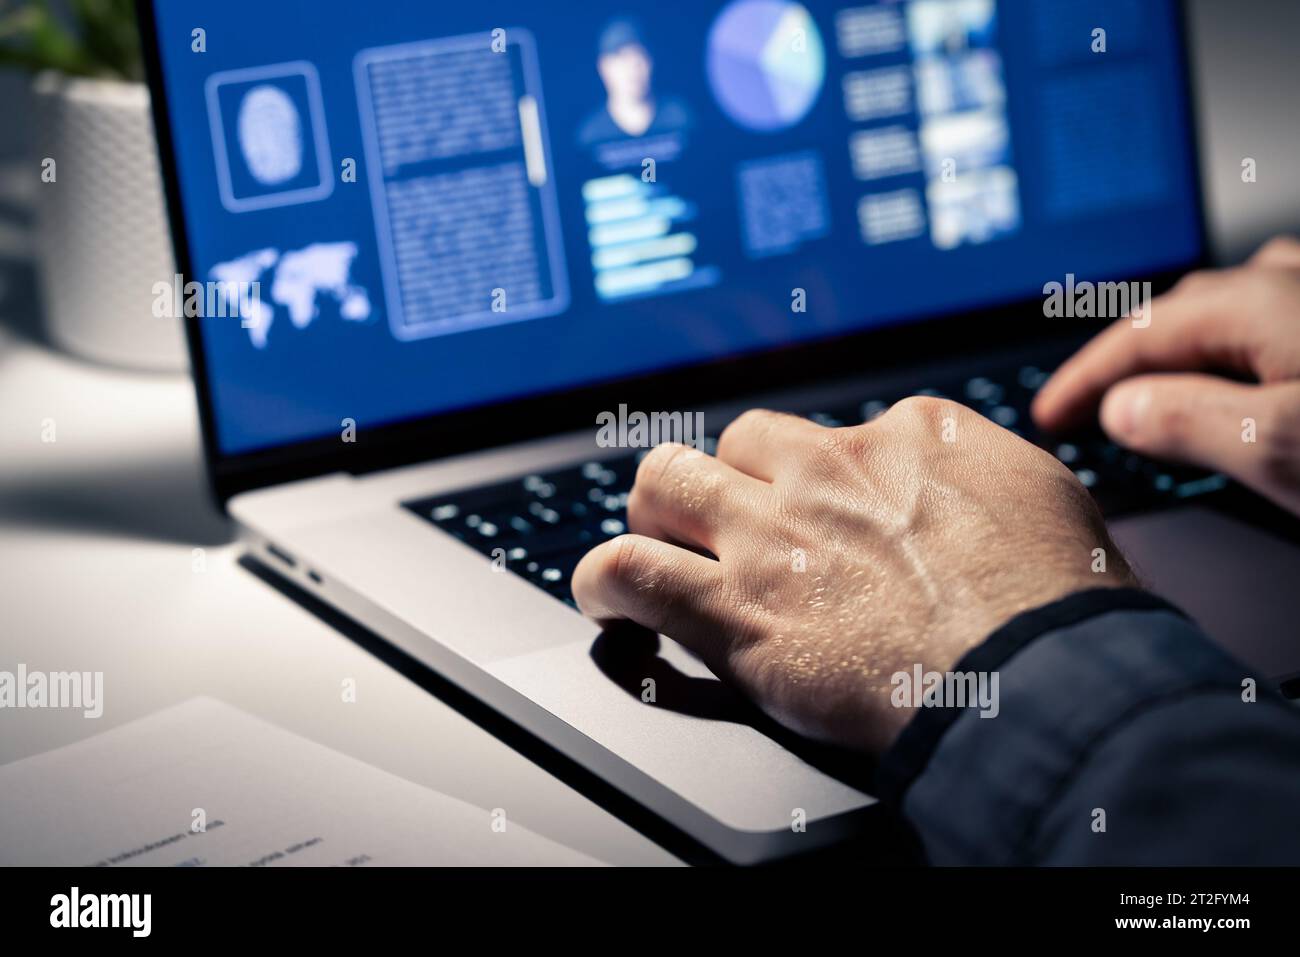 Criminal case investigation. Police or private detective using computer. Evidence document and profile of crime suspect with photo in laptop. Stock Photo